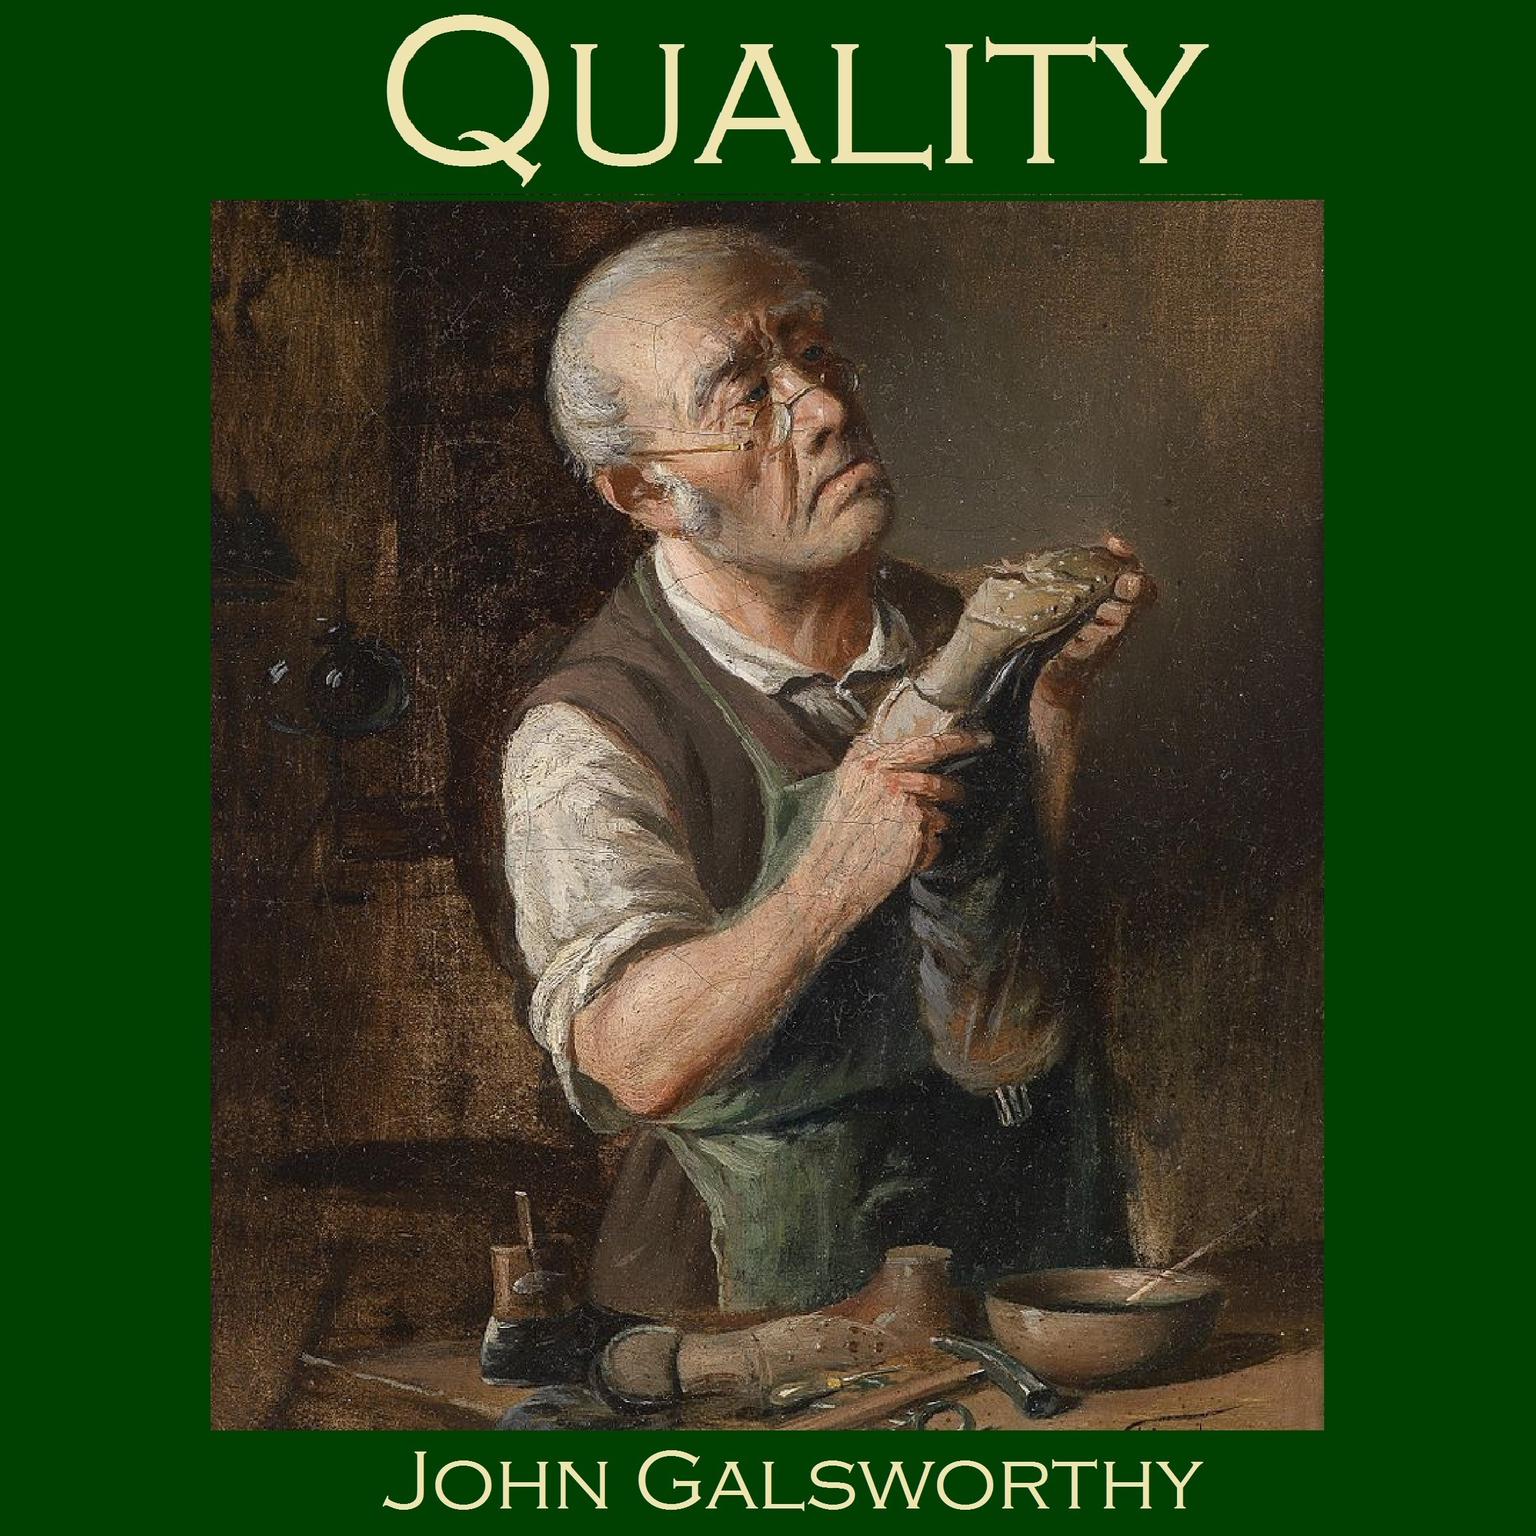 Quality Audiobook, by John Galsworthy